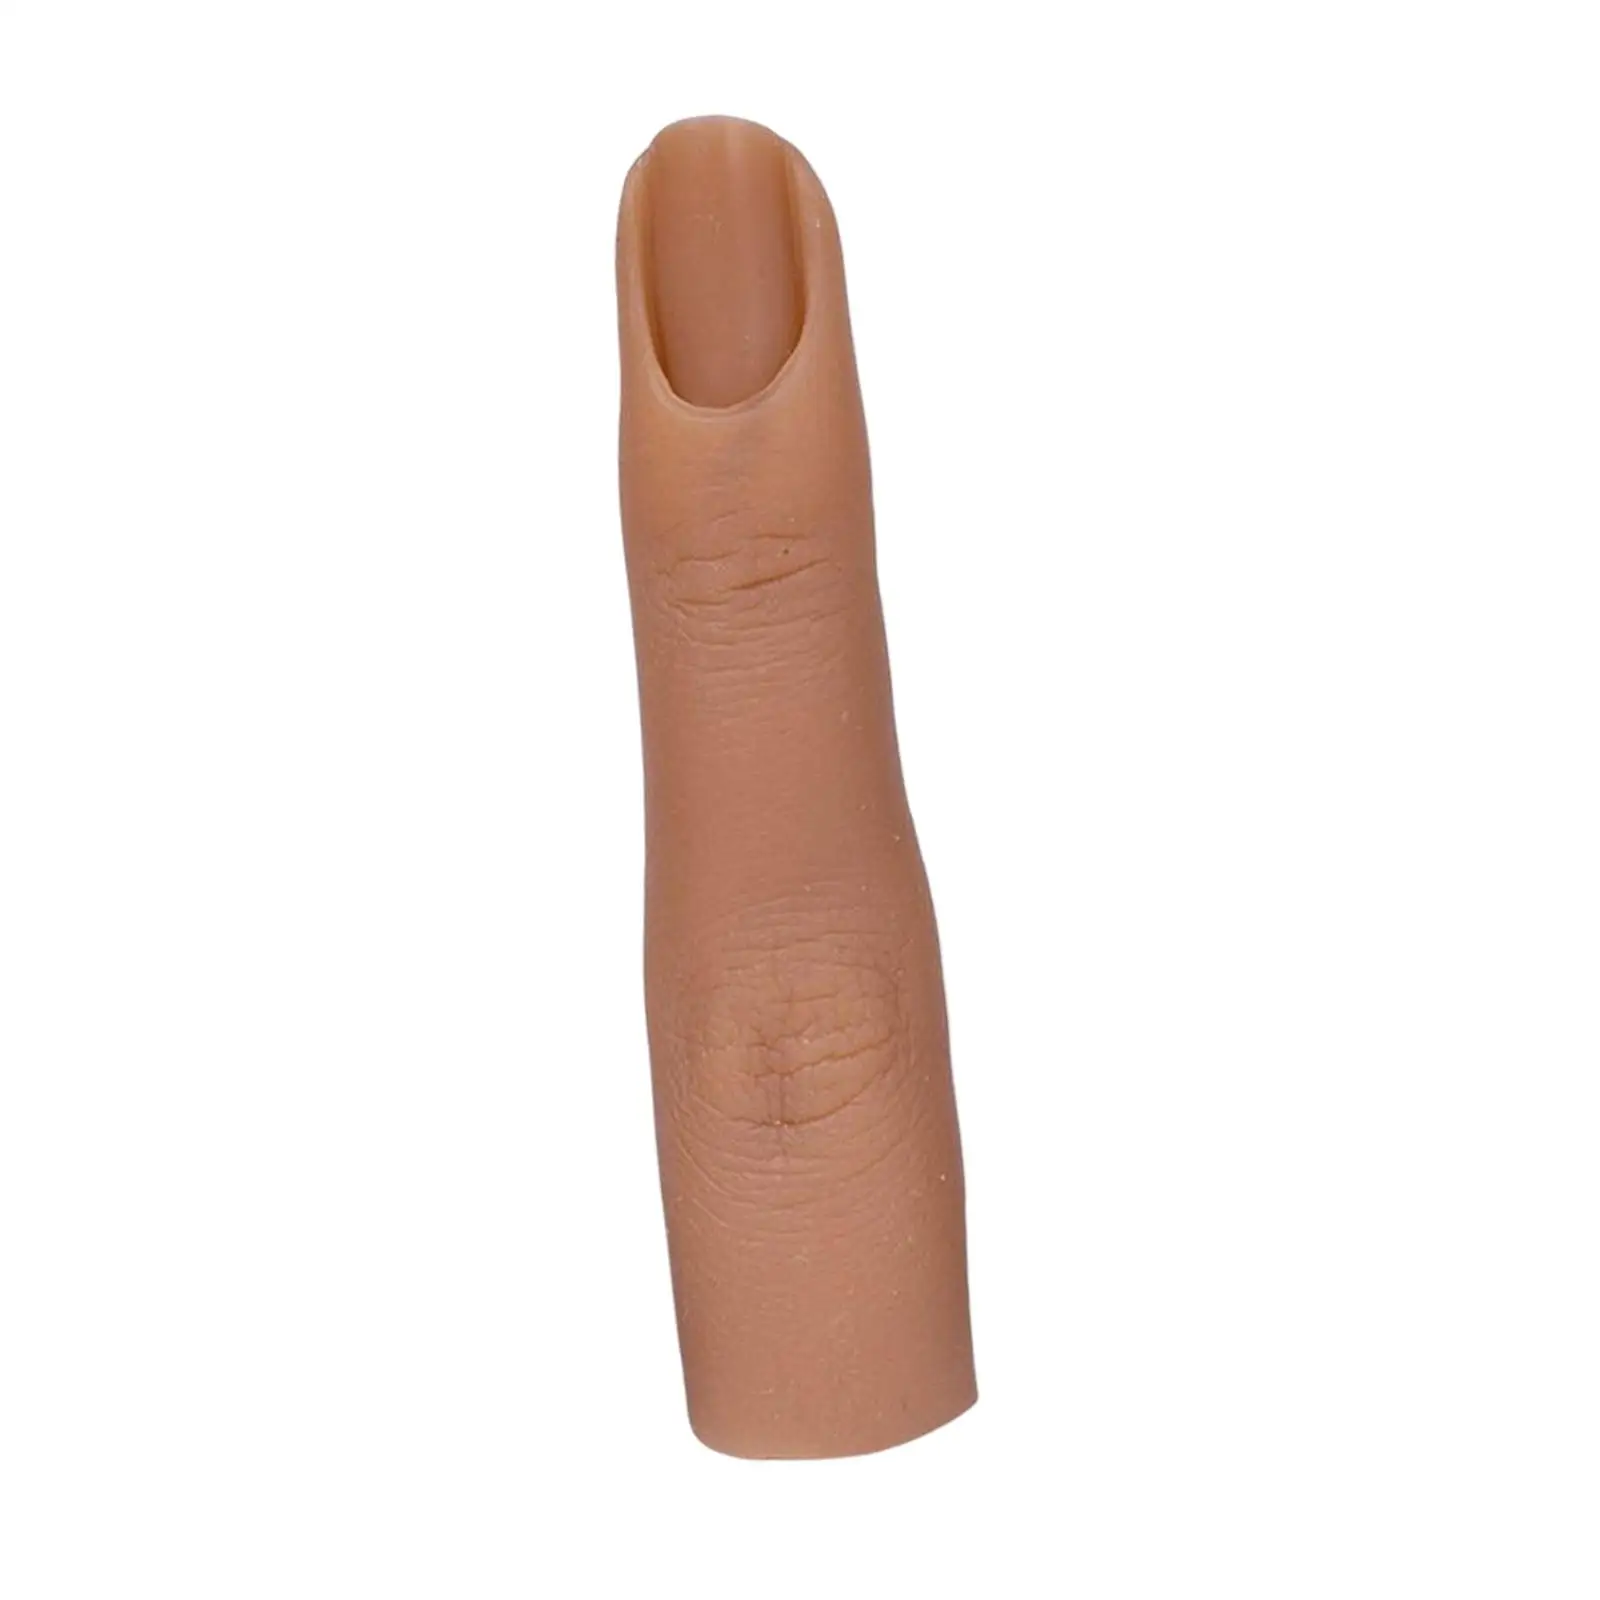 Nail finger Fake Finger with Joints False Nail Training Accesories for Beginners Women